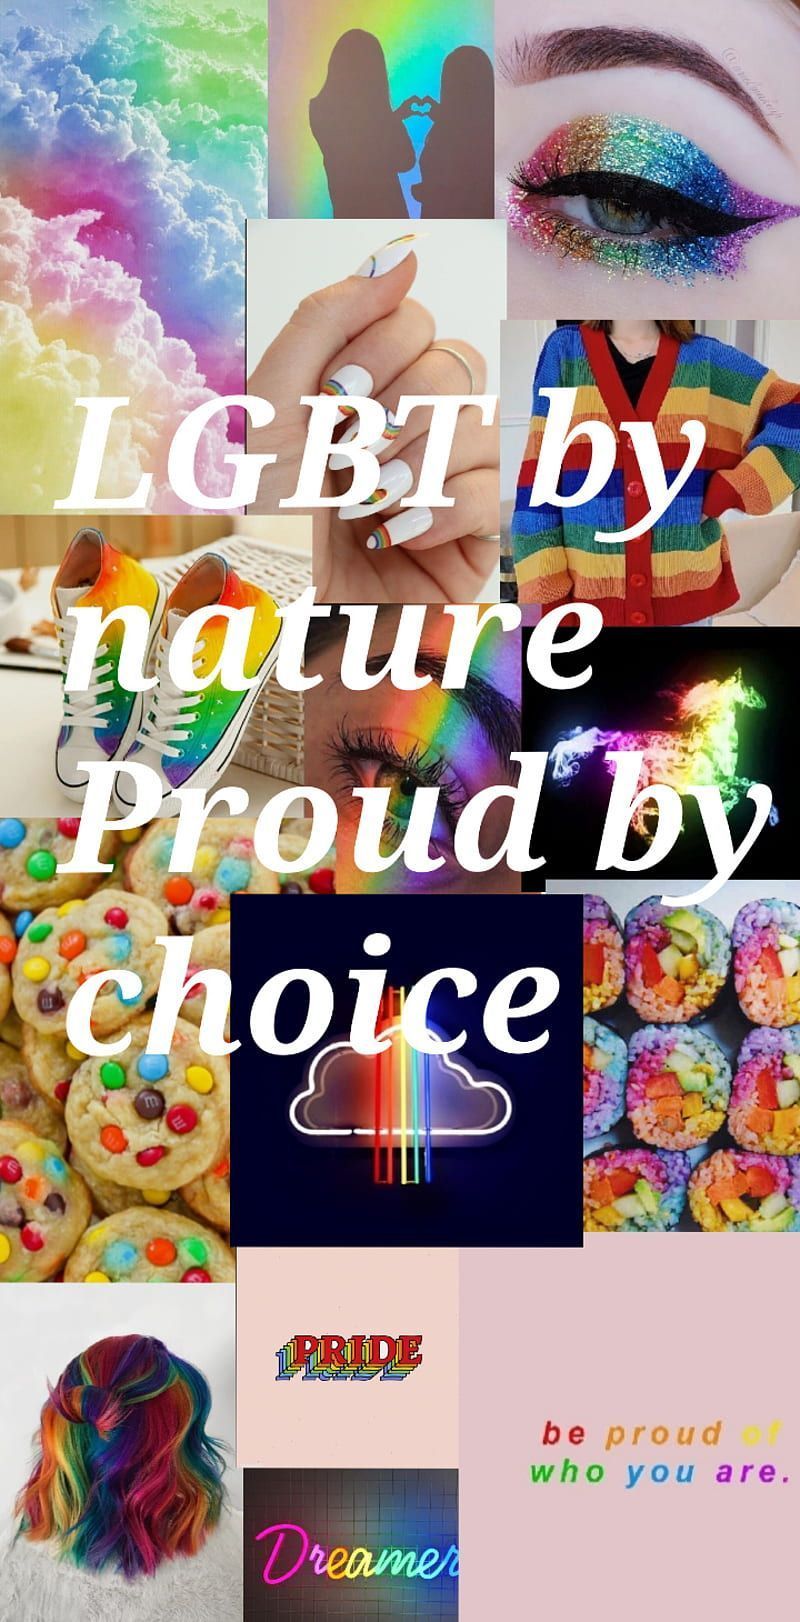 A collage of pictures with the words lgbt by nature proud - Pride, gay, LGBT, lesbian, pansexual